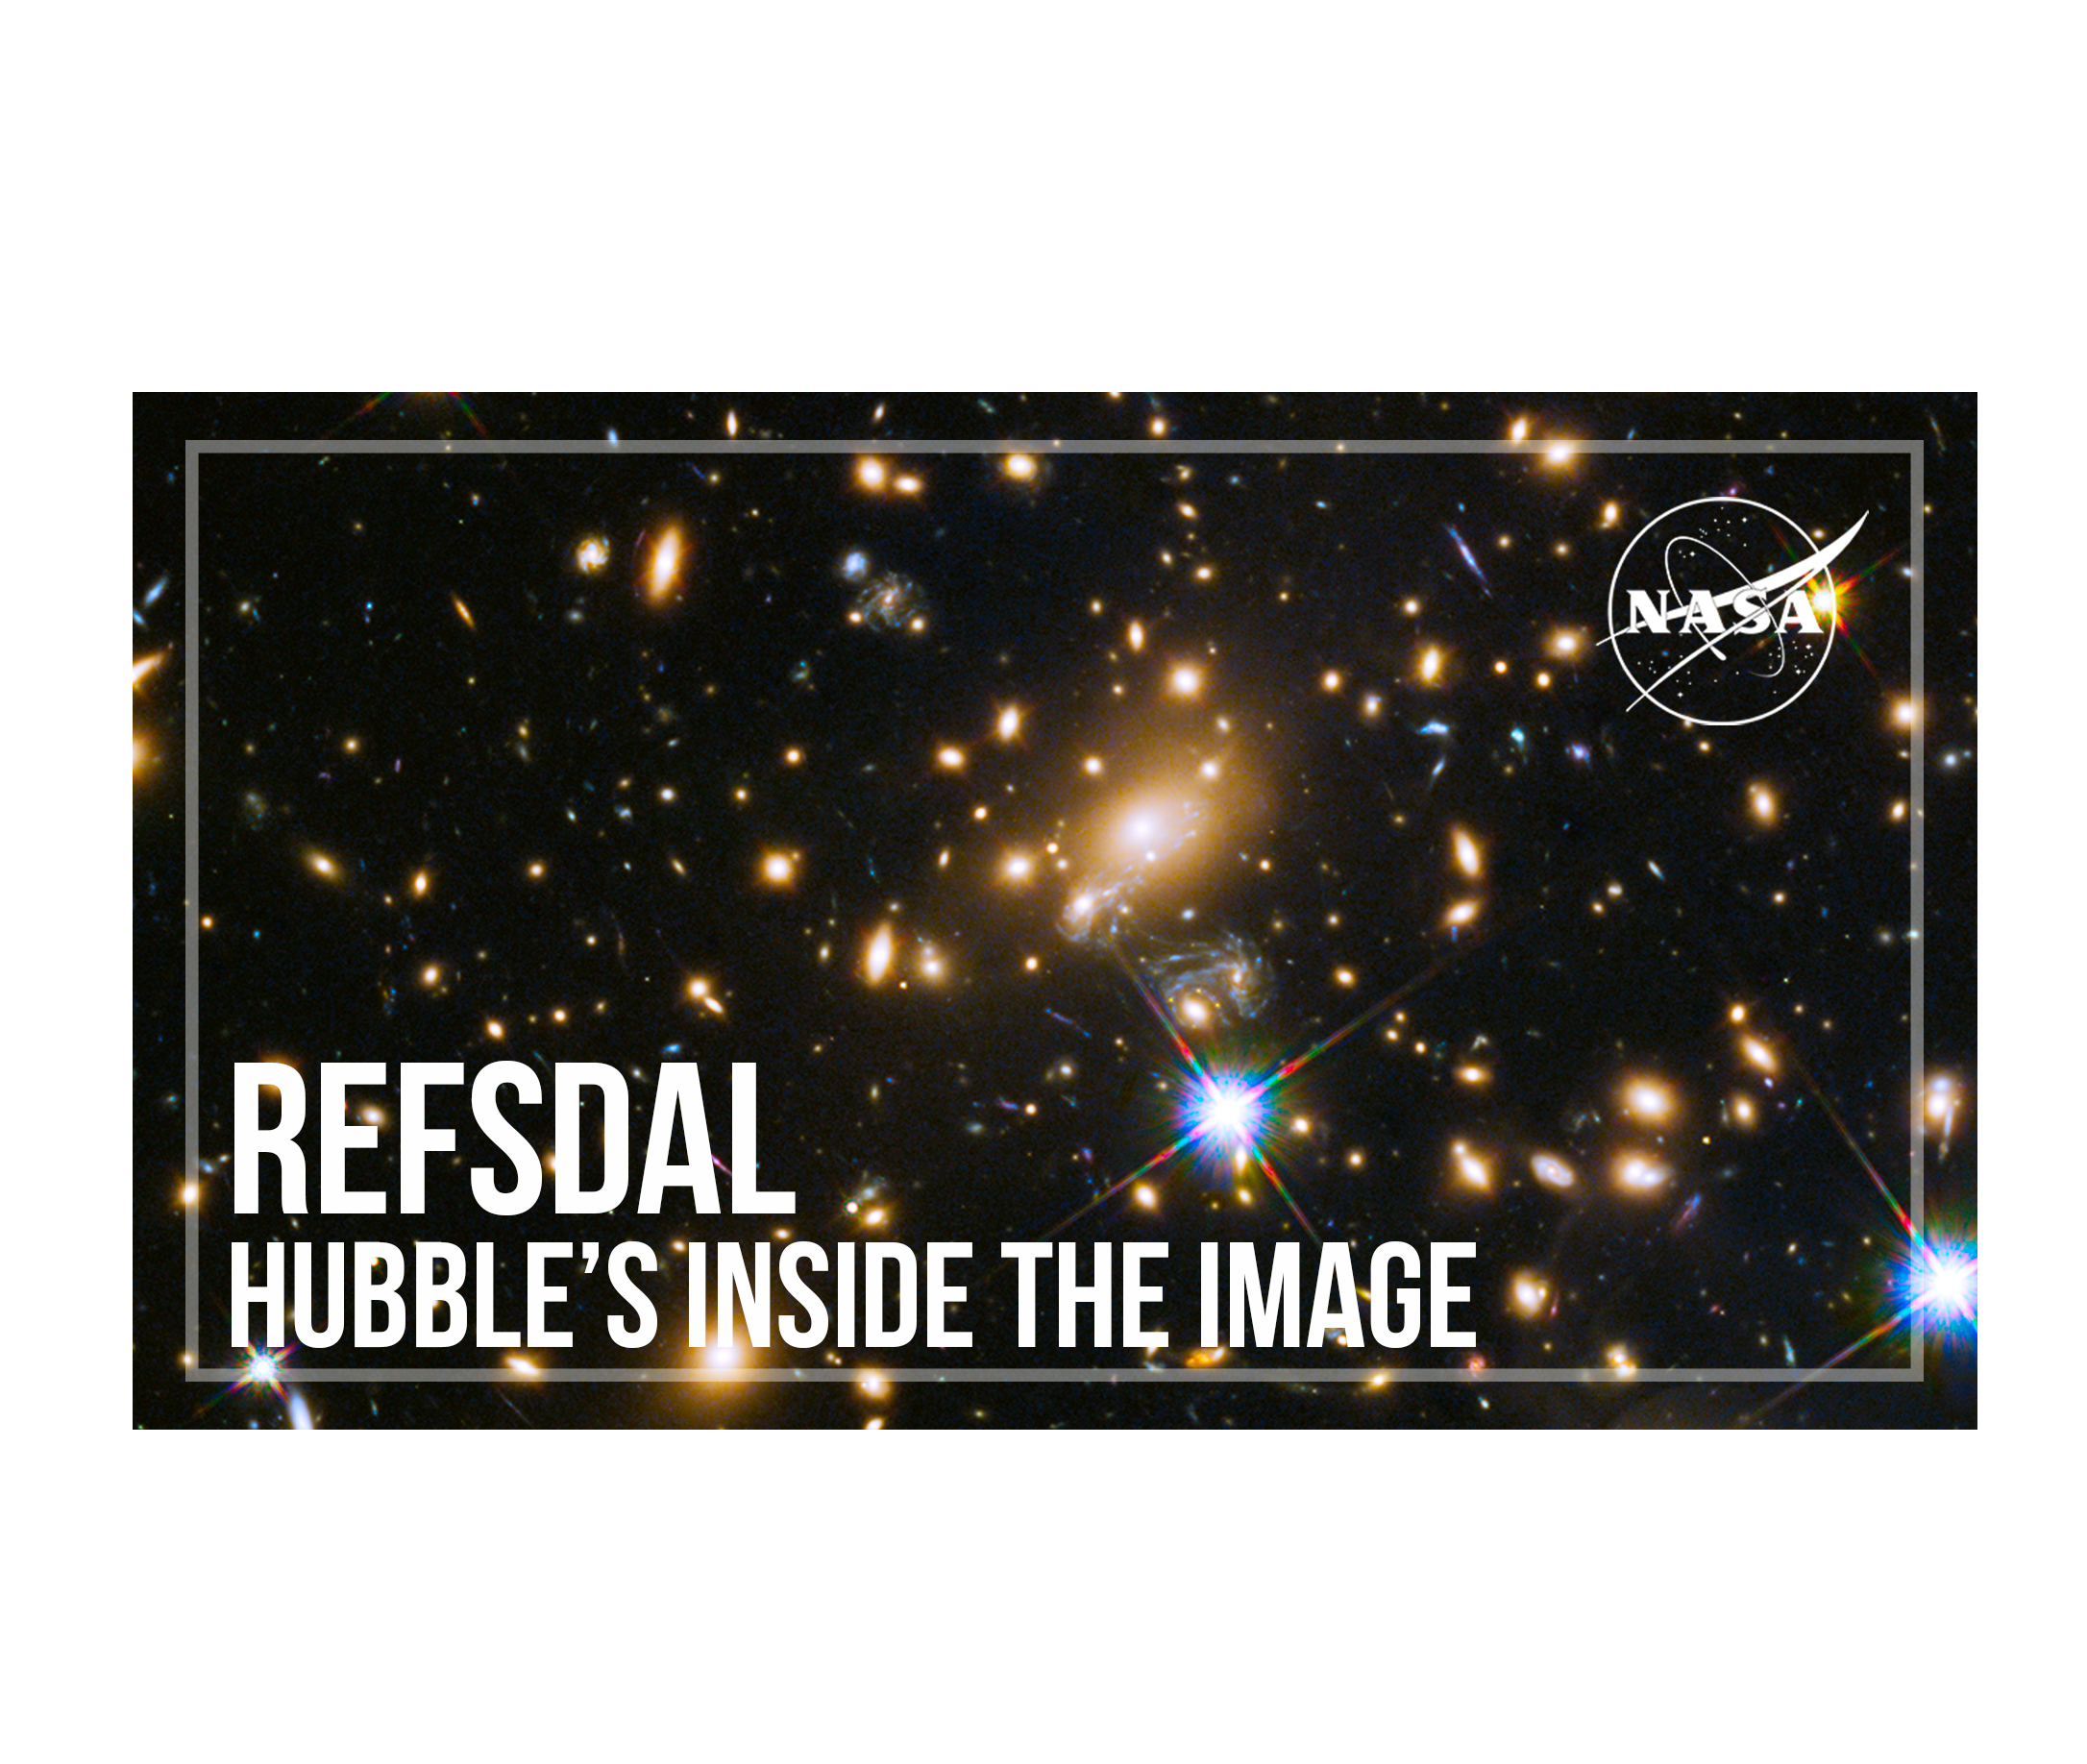 Background image: a field of galaxies against a black background. Text in white: Refsdal: Hubble's Inside the Image